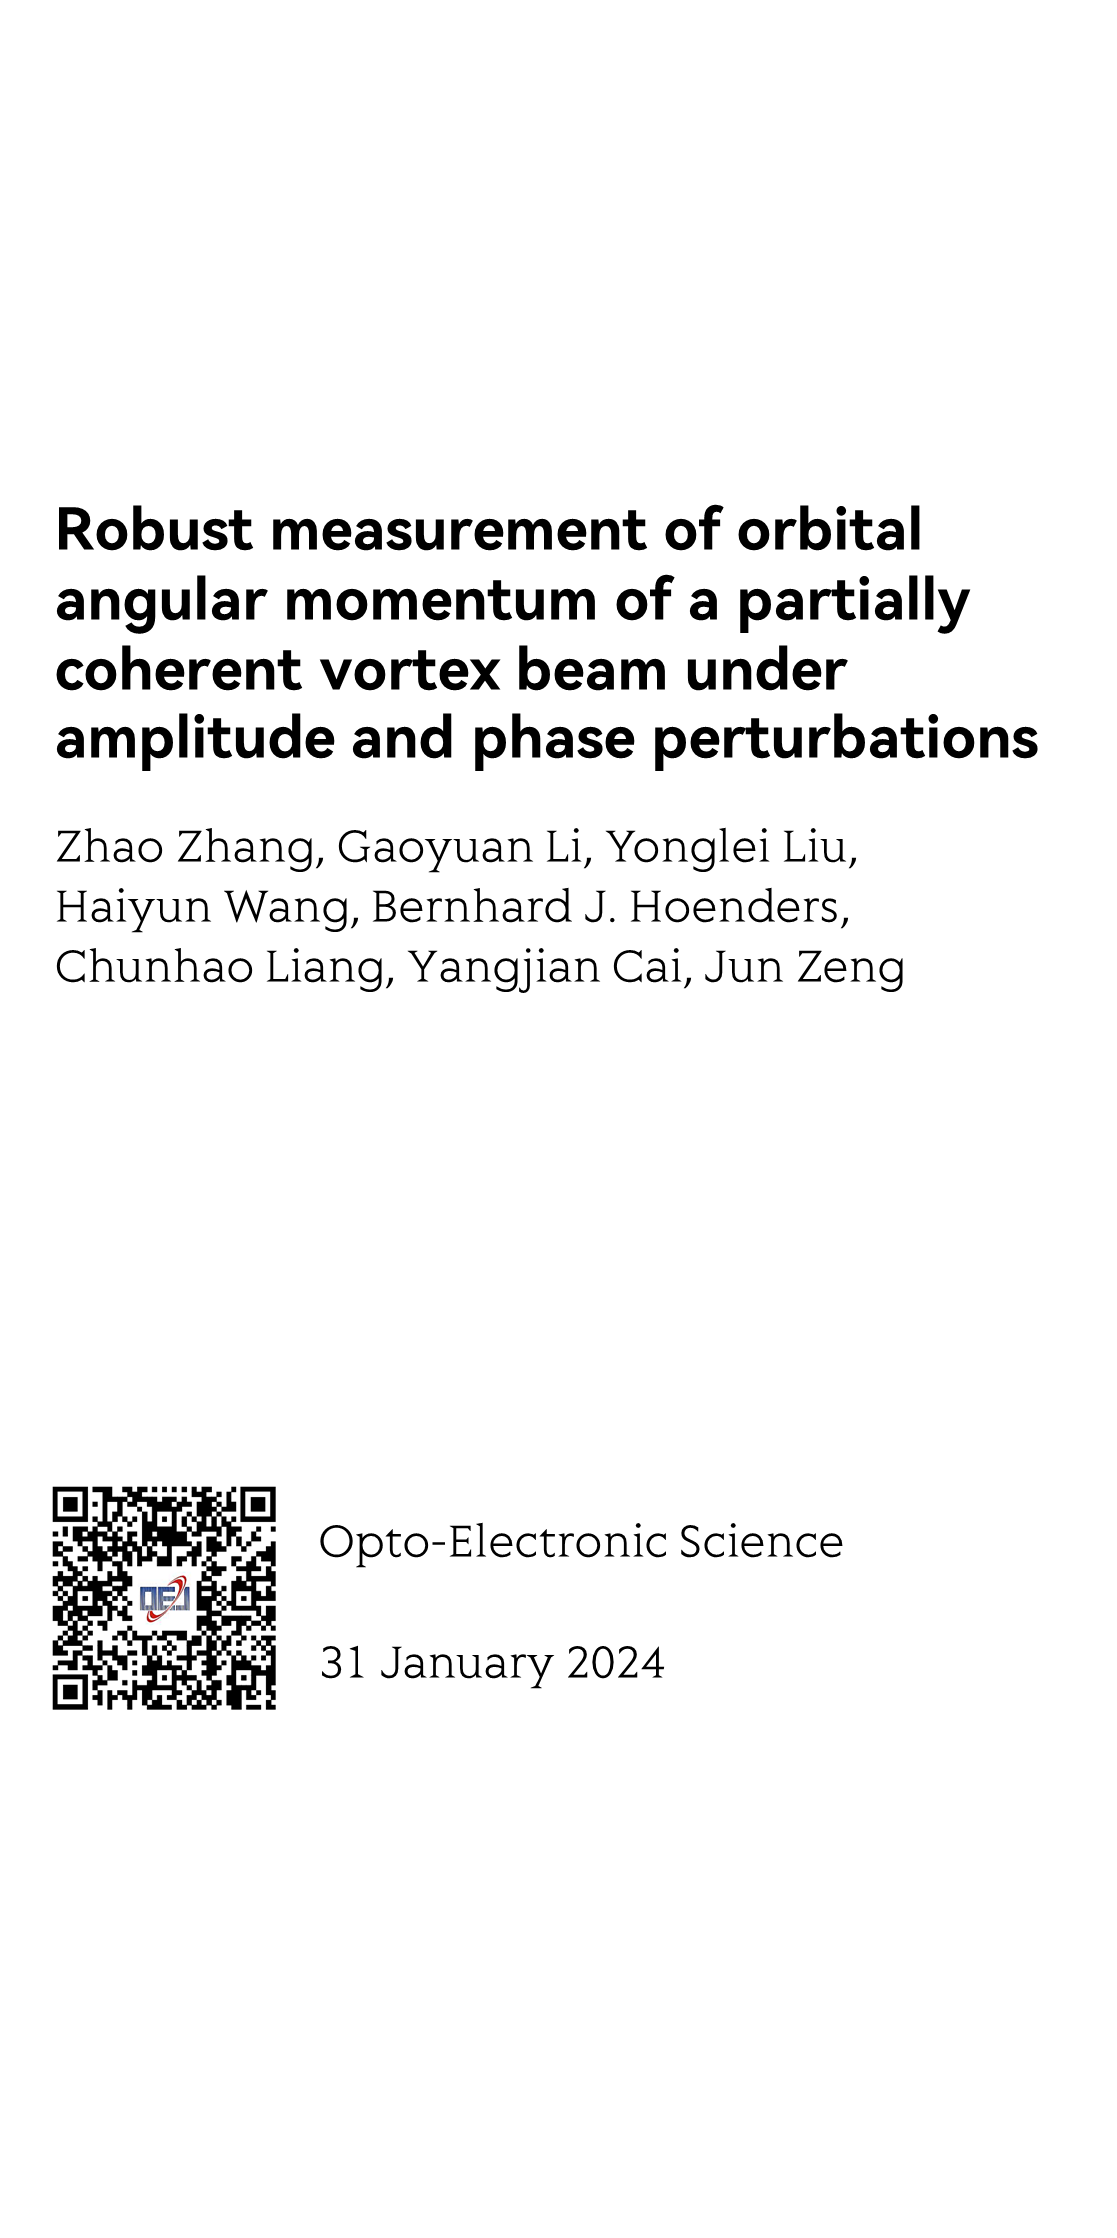 Robust measurement of orbital angular momentum of a partially coherent vortex beam under amplitude and phase perturbations_1